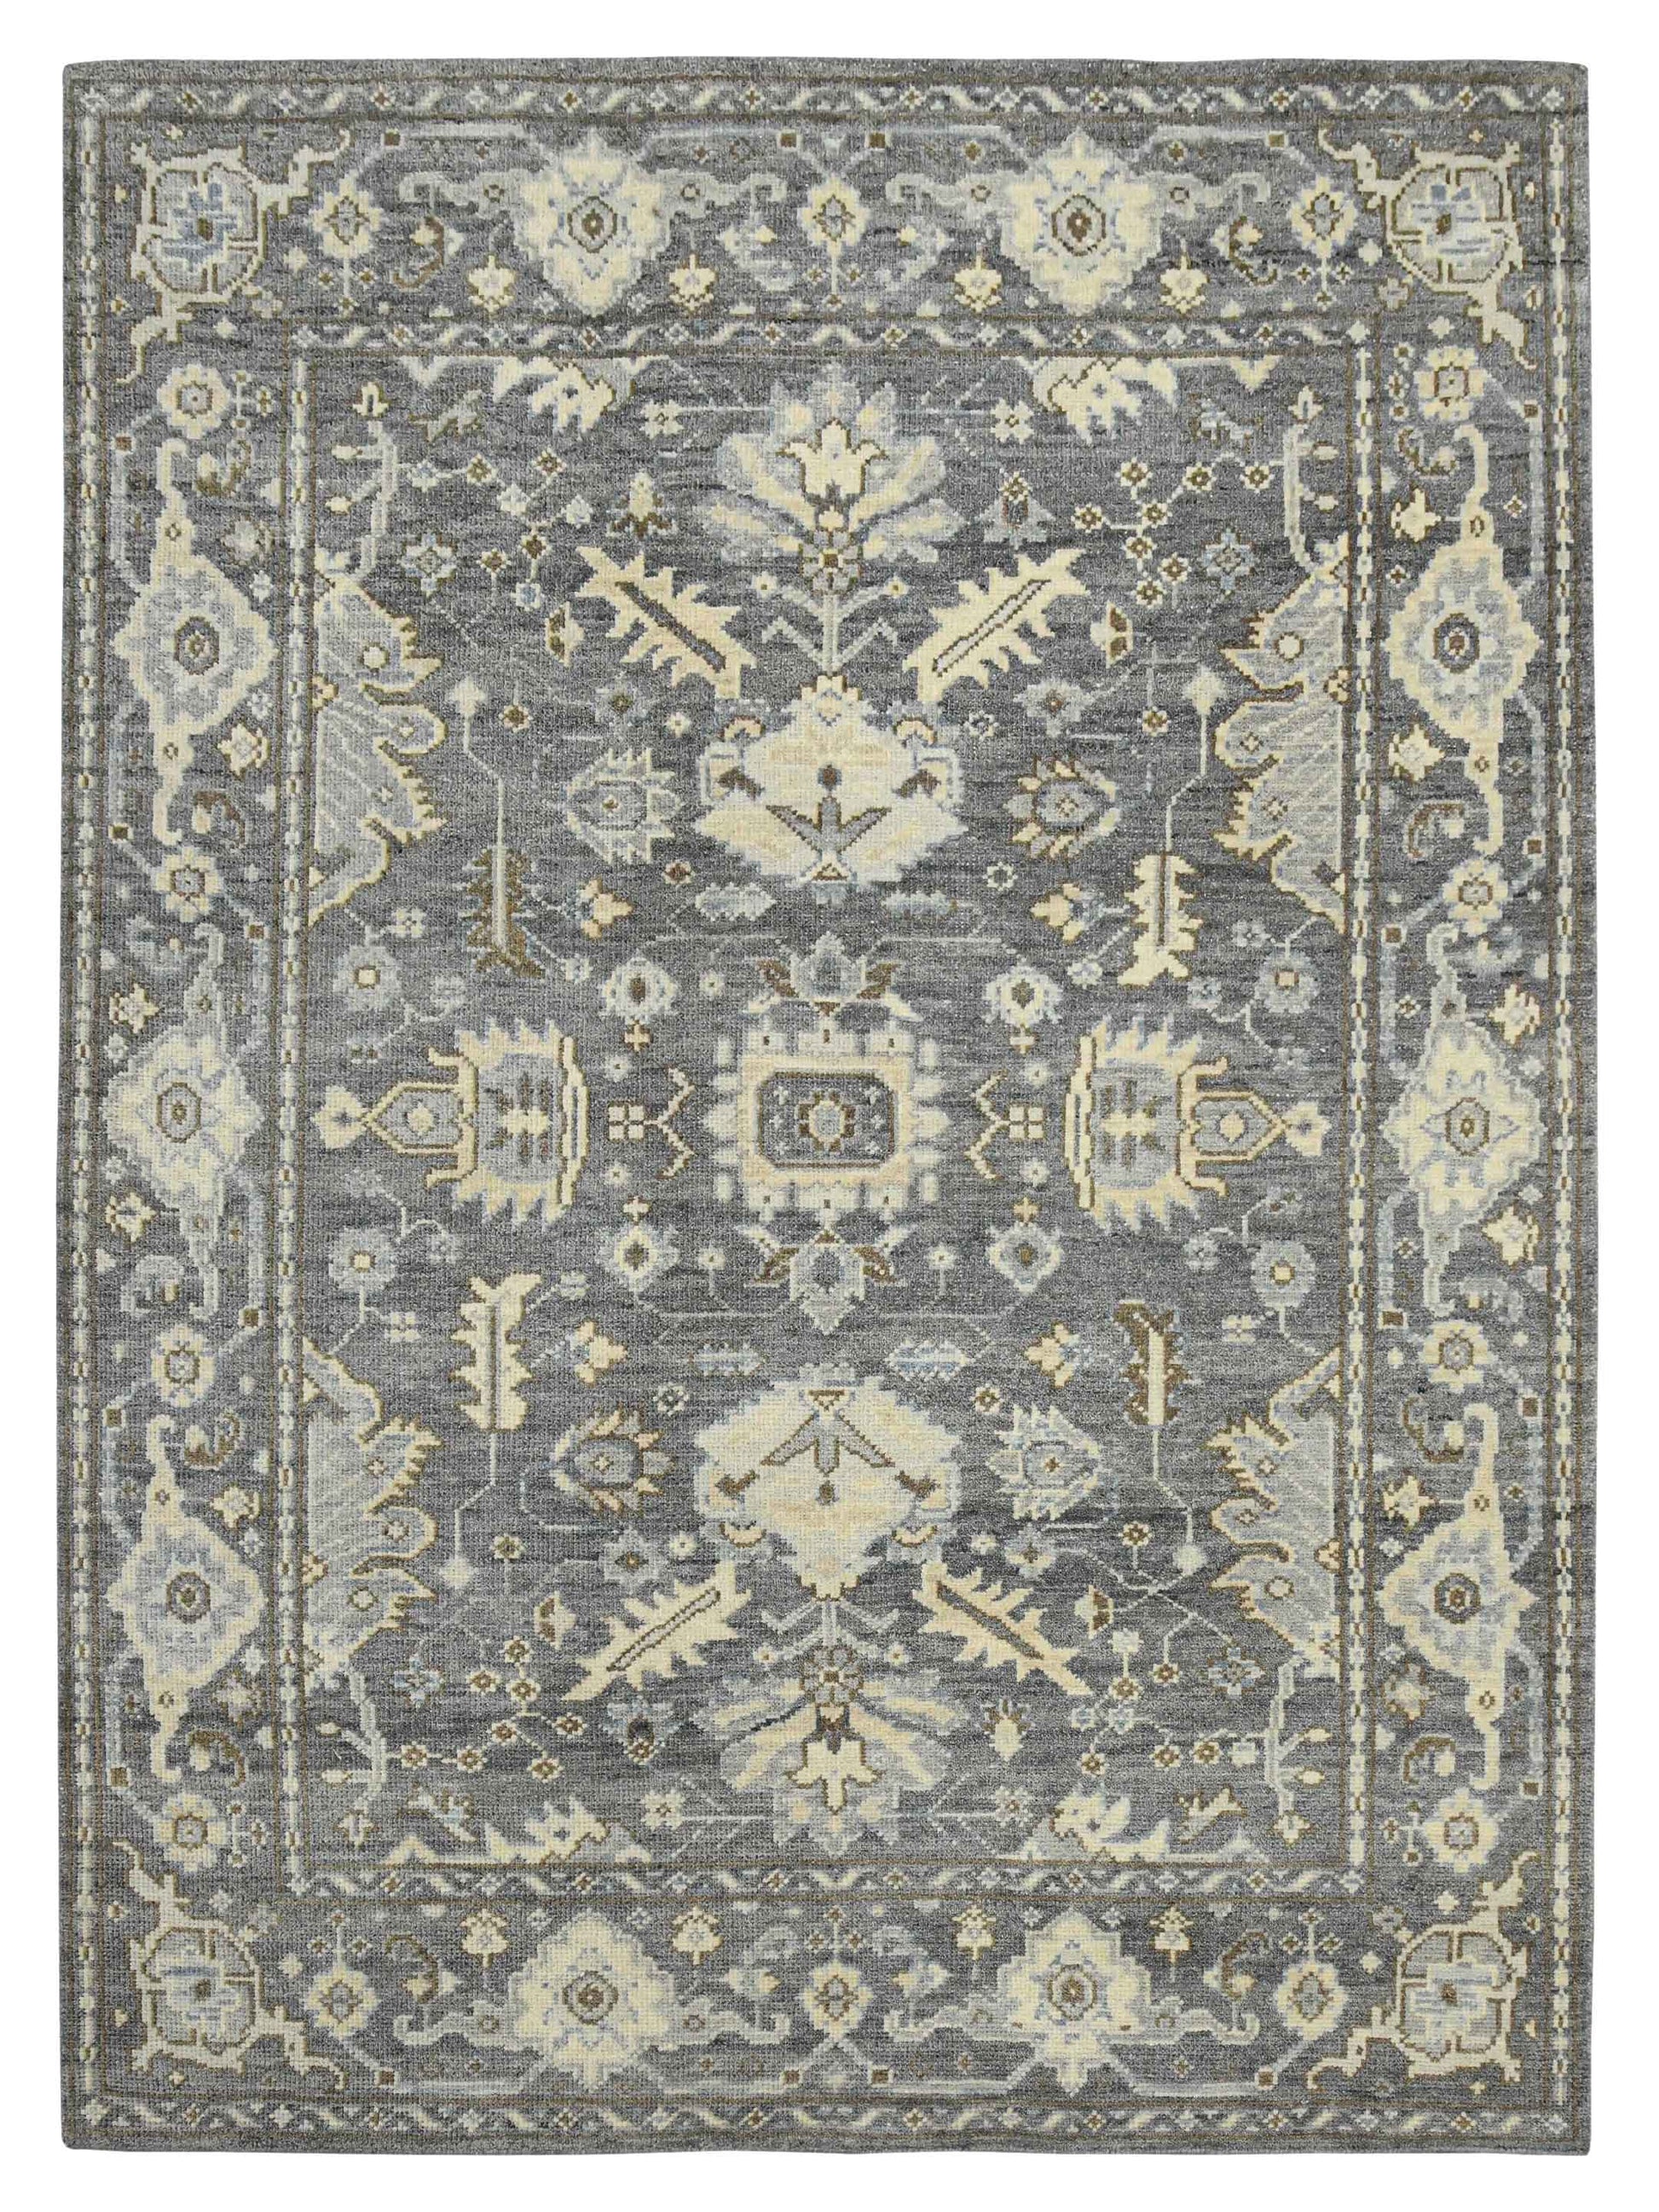 Limited DERBY DE-155 BROWN Traditional Knotted Rug